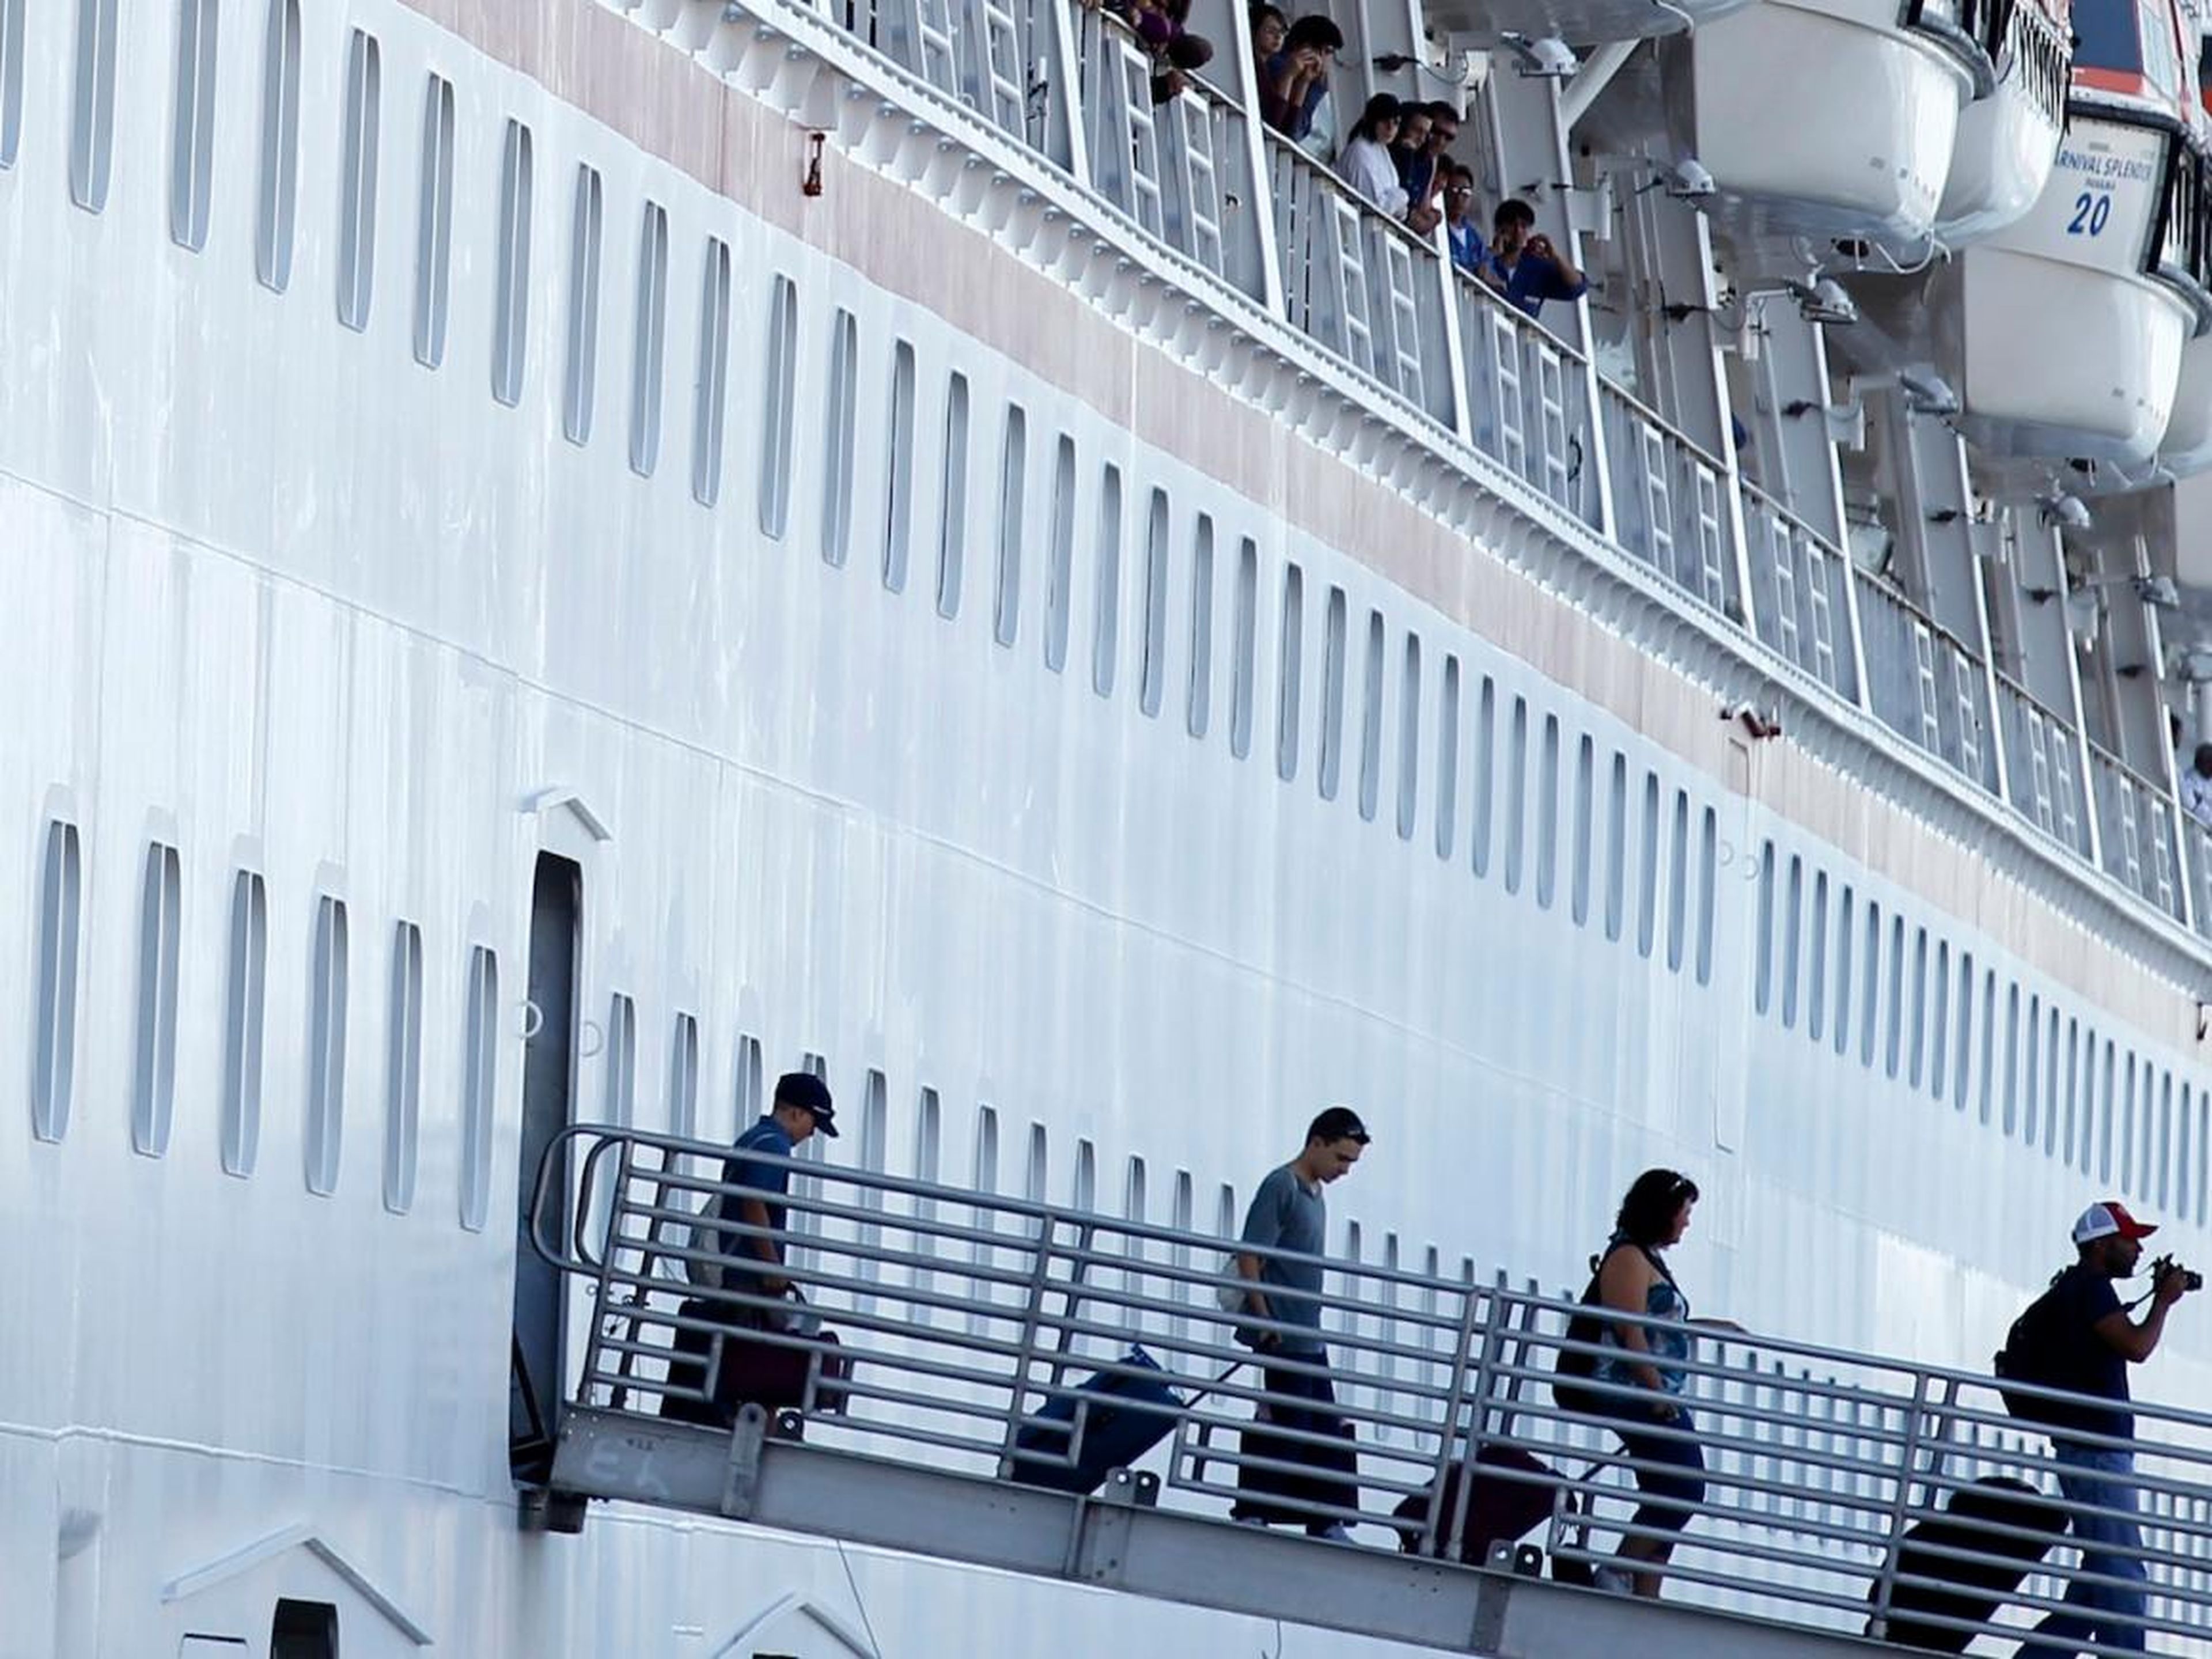 Sexual assault is the most common crime reported on cruise ships